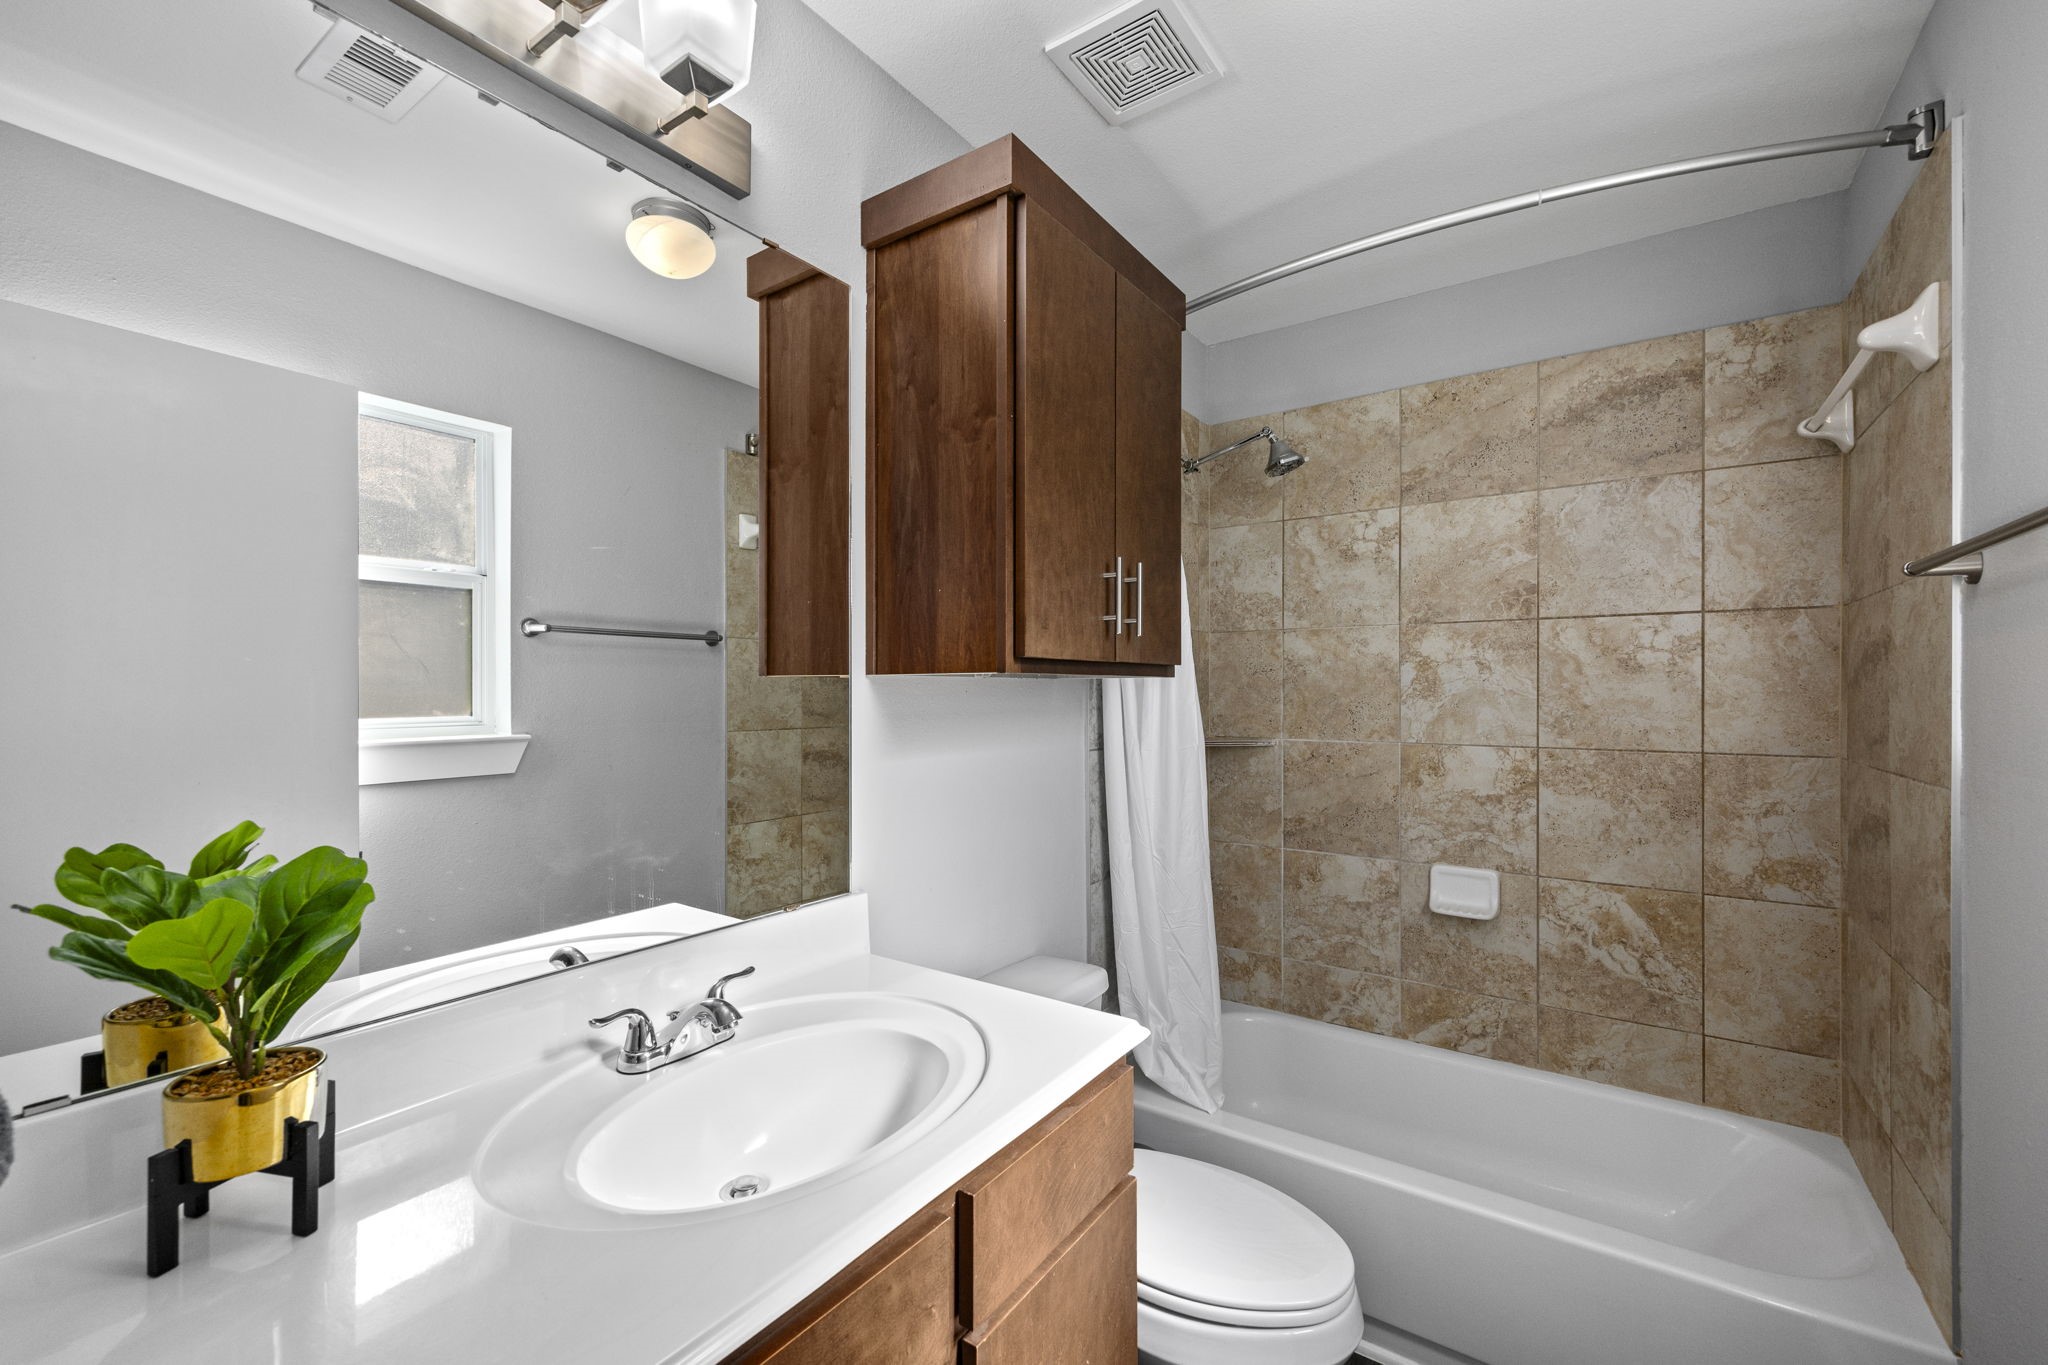 Primary bathroom with shower/combo tub